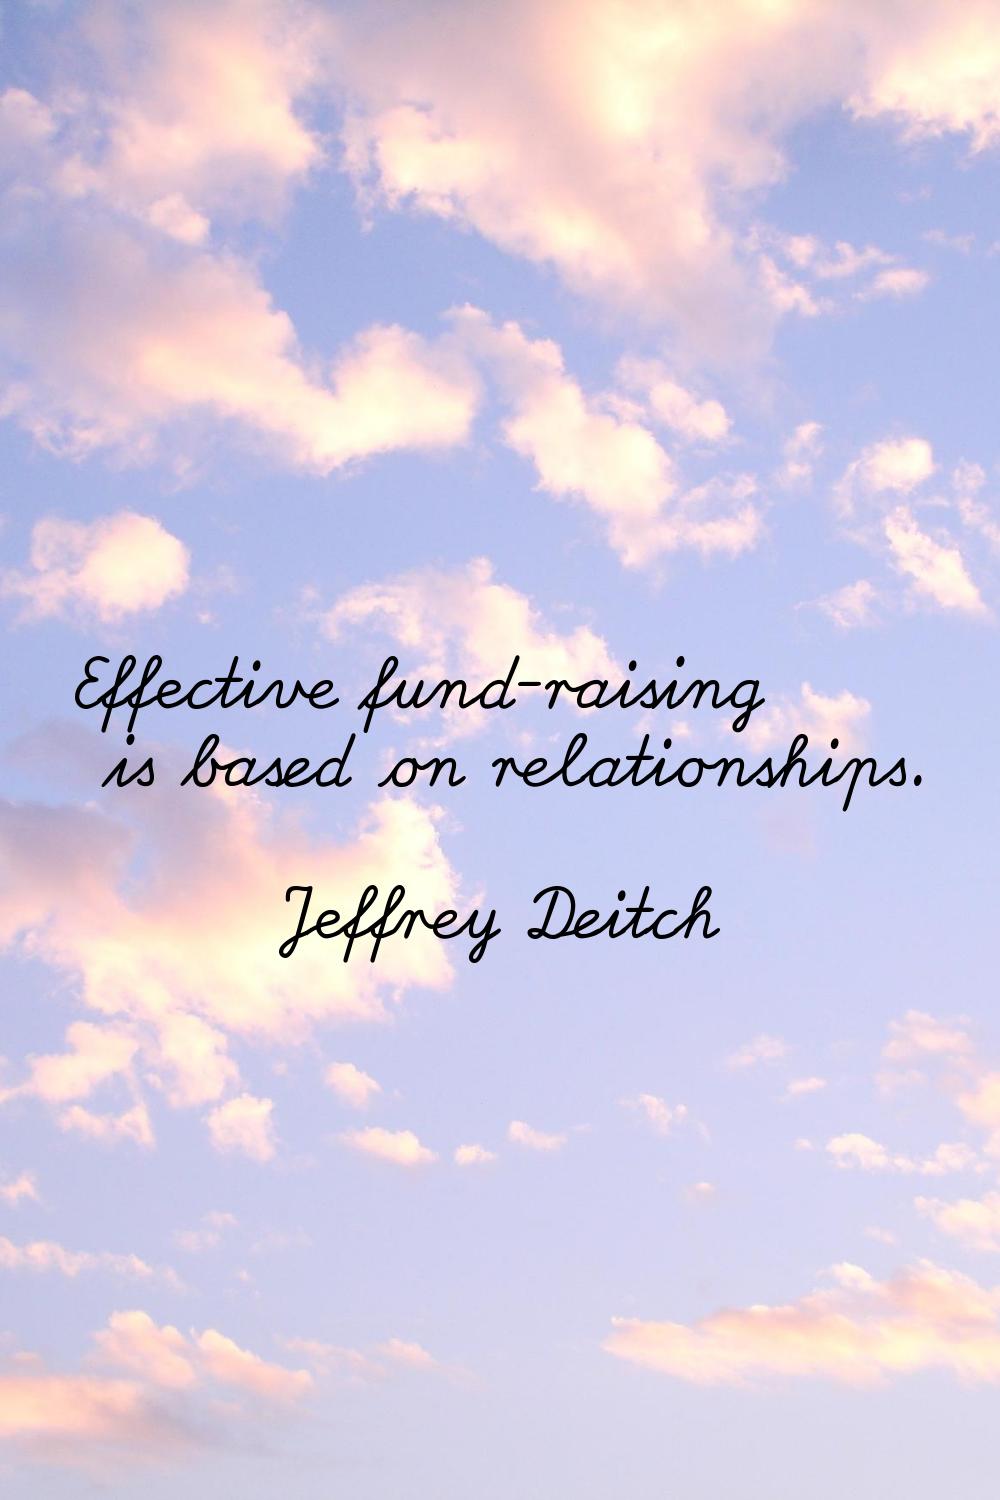 Effective fund-raising is based on relationships.